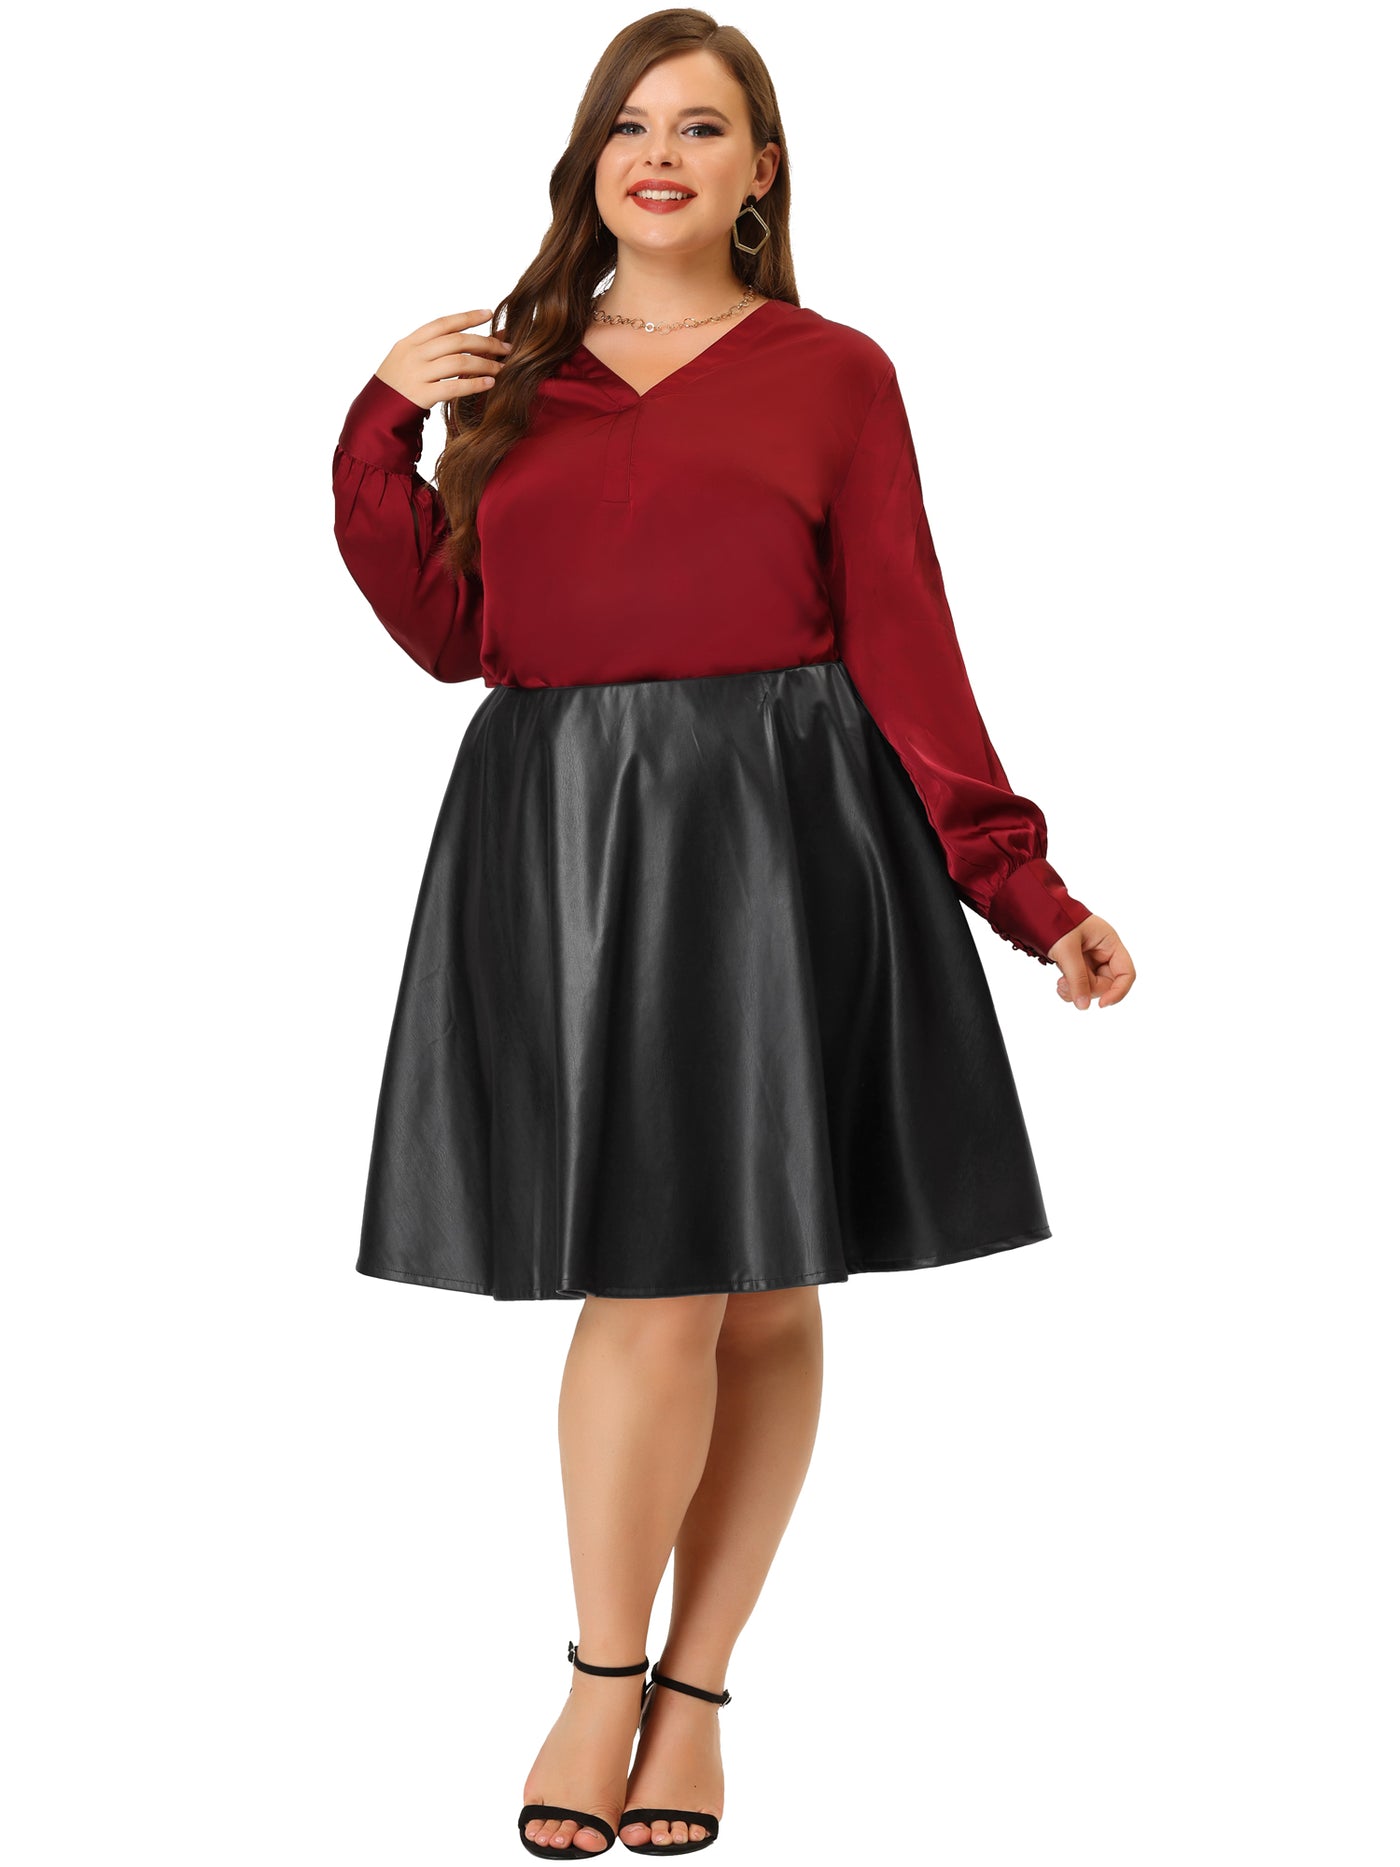 Bublédon Fit And Flare Faux Leather Elastic Waist Skirt